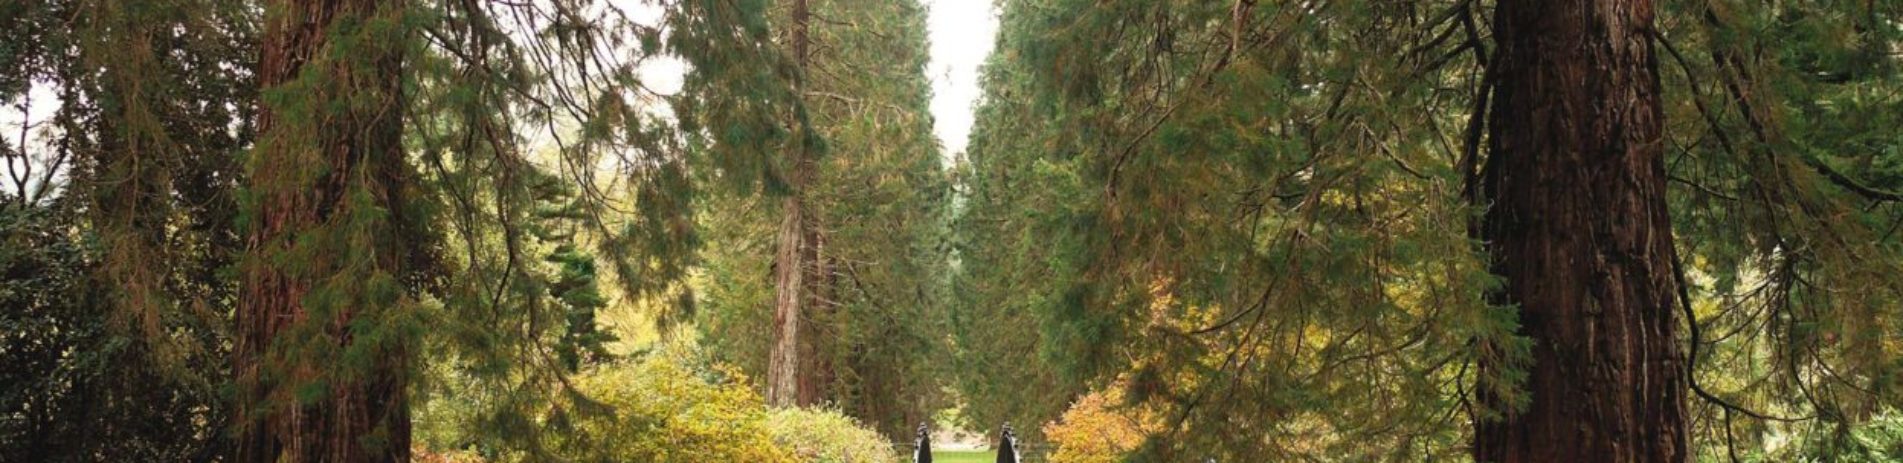 benmore-gardens-main-path-with-sequoia-tree-trunks-in-the-foreground